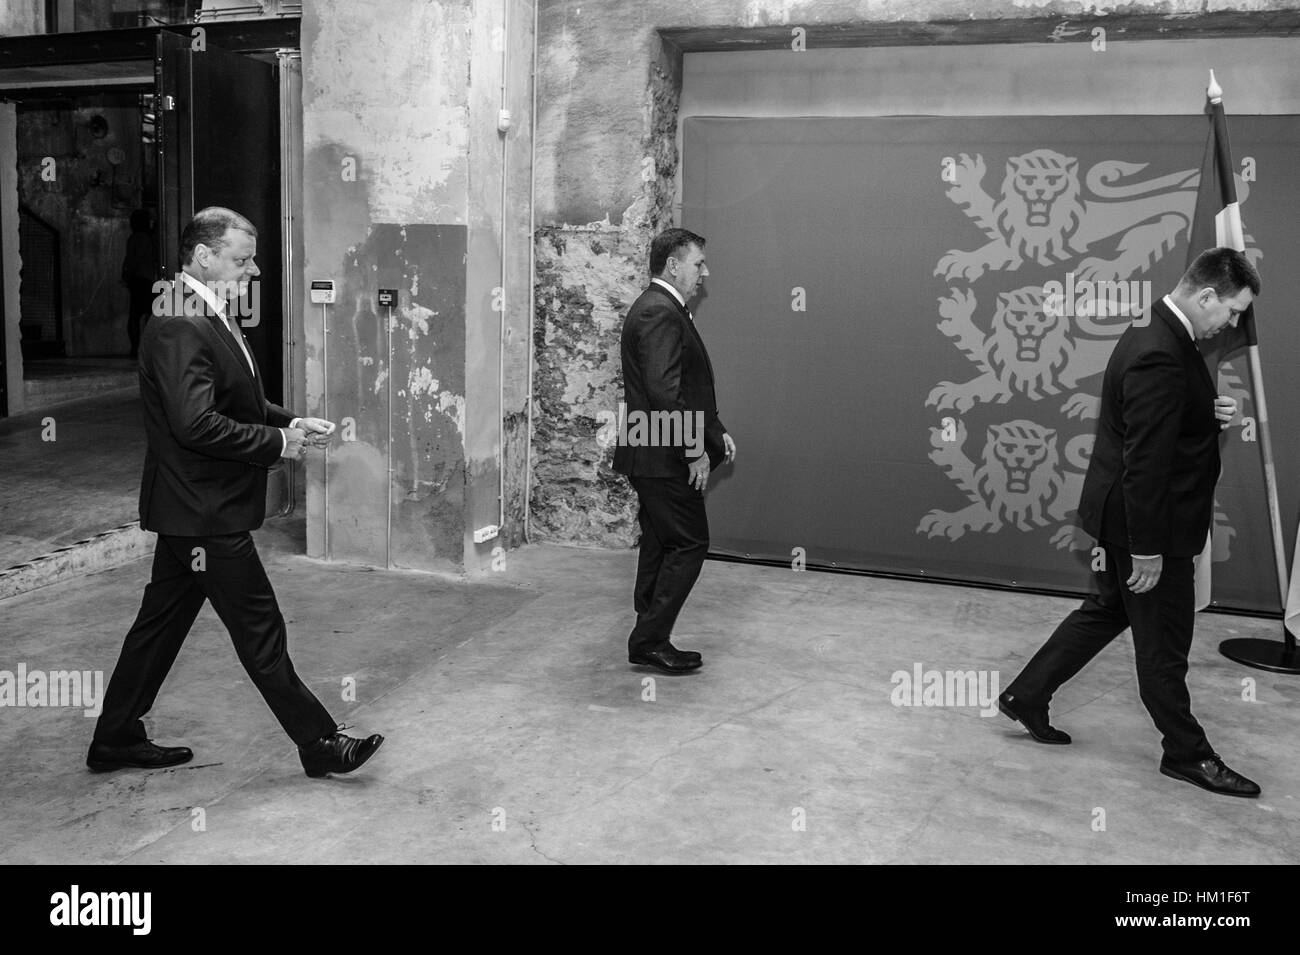 Tallinn, Estonia, 31th January 2017. Estonian Prime Minister Juri Ratas (R), Latvian Prime Minister Maris Kucinskis (C) and Lithuanian Prime Minister Saulius Skvernelis (L) arrive prior a meeting with the Baltic prime ministers. The three Baltic prime ministers meet today to discuss on regional security, energy and transport links, as well as the future of the European Union. Nicolas Bouvy/Alamy Live News Stock Photo